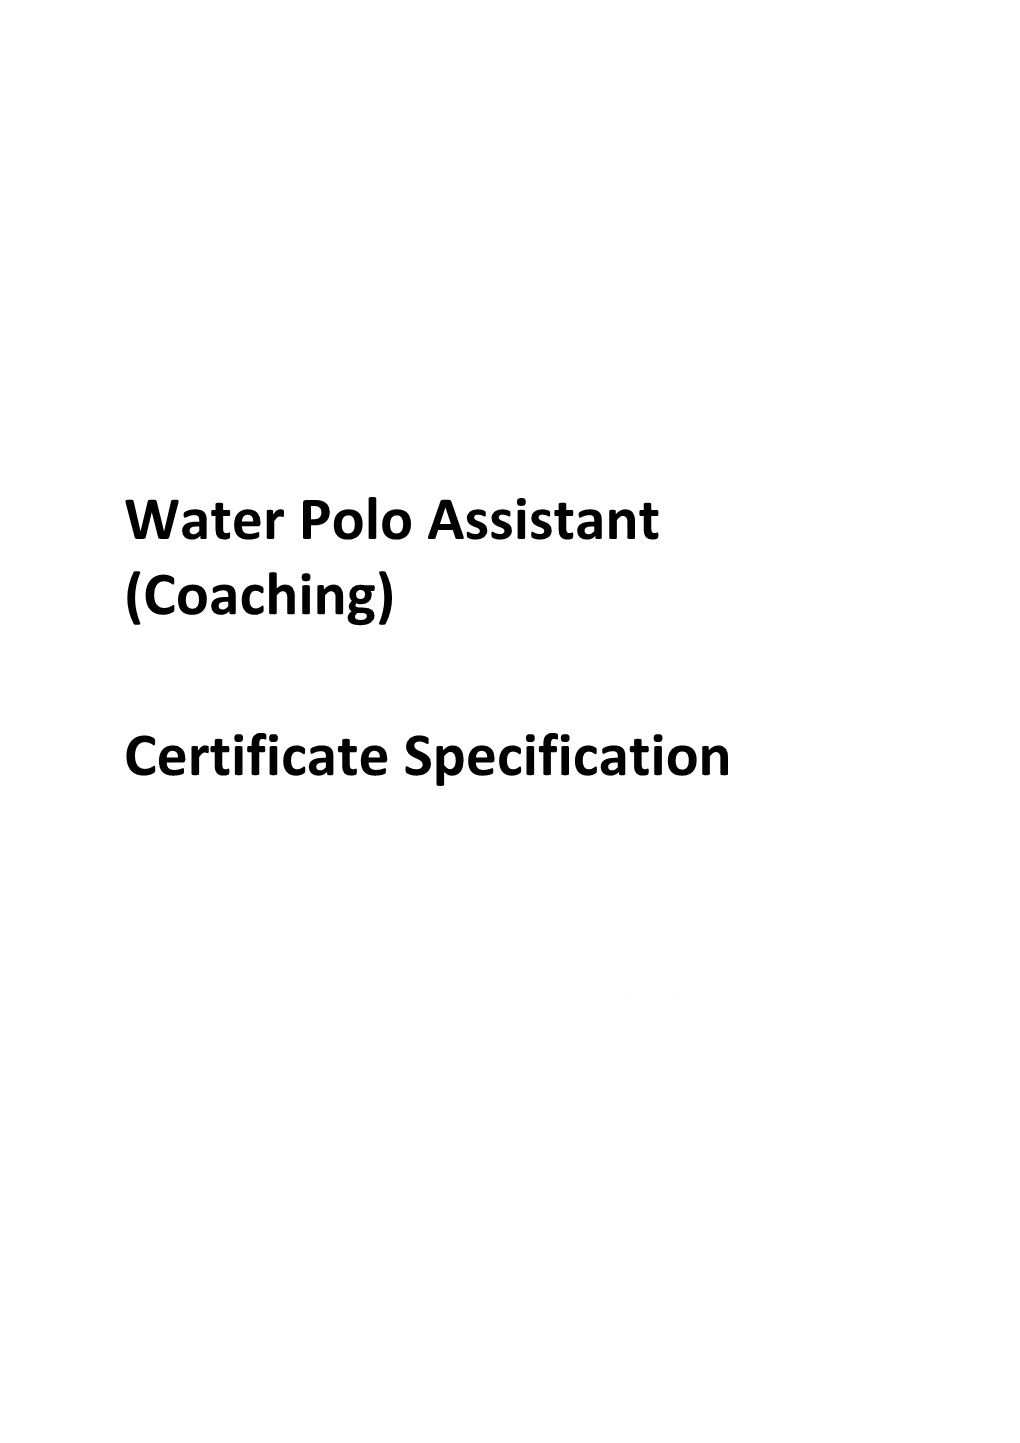 (Coaching) Certificate Specification